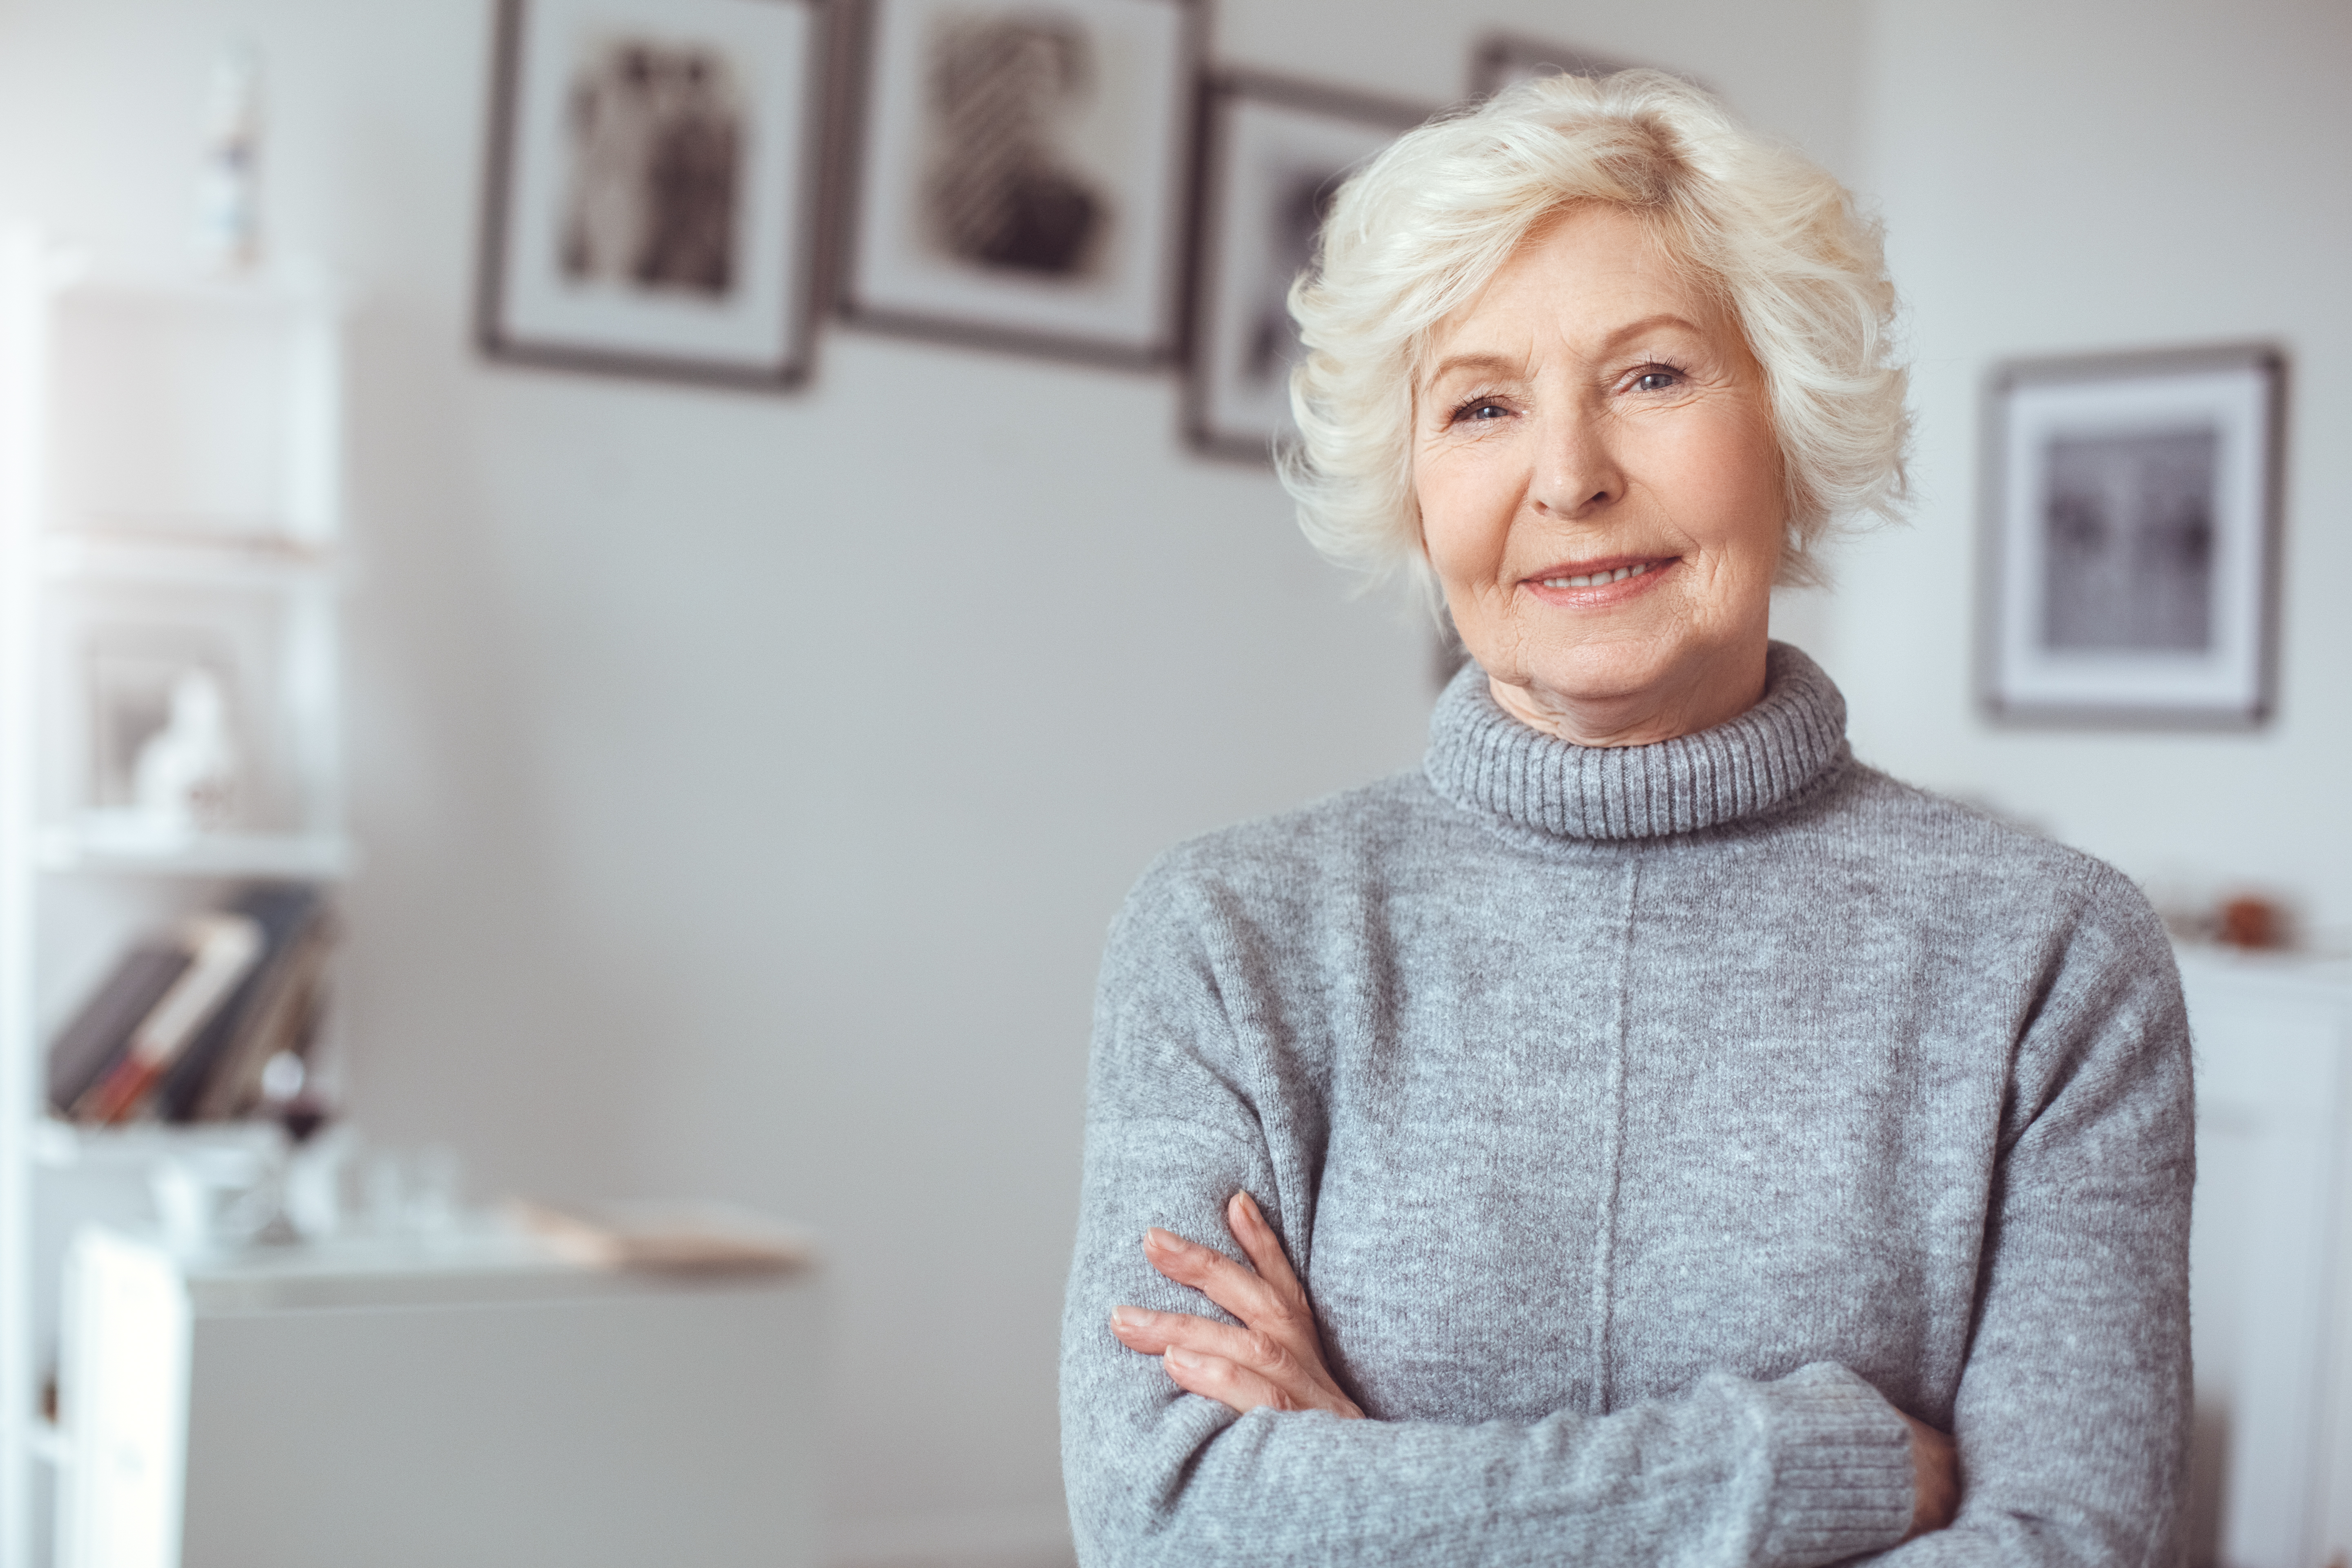 An older woman standing with her arms folded | Source: Shutterstock